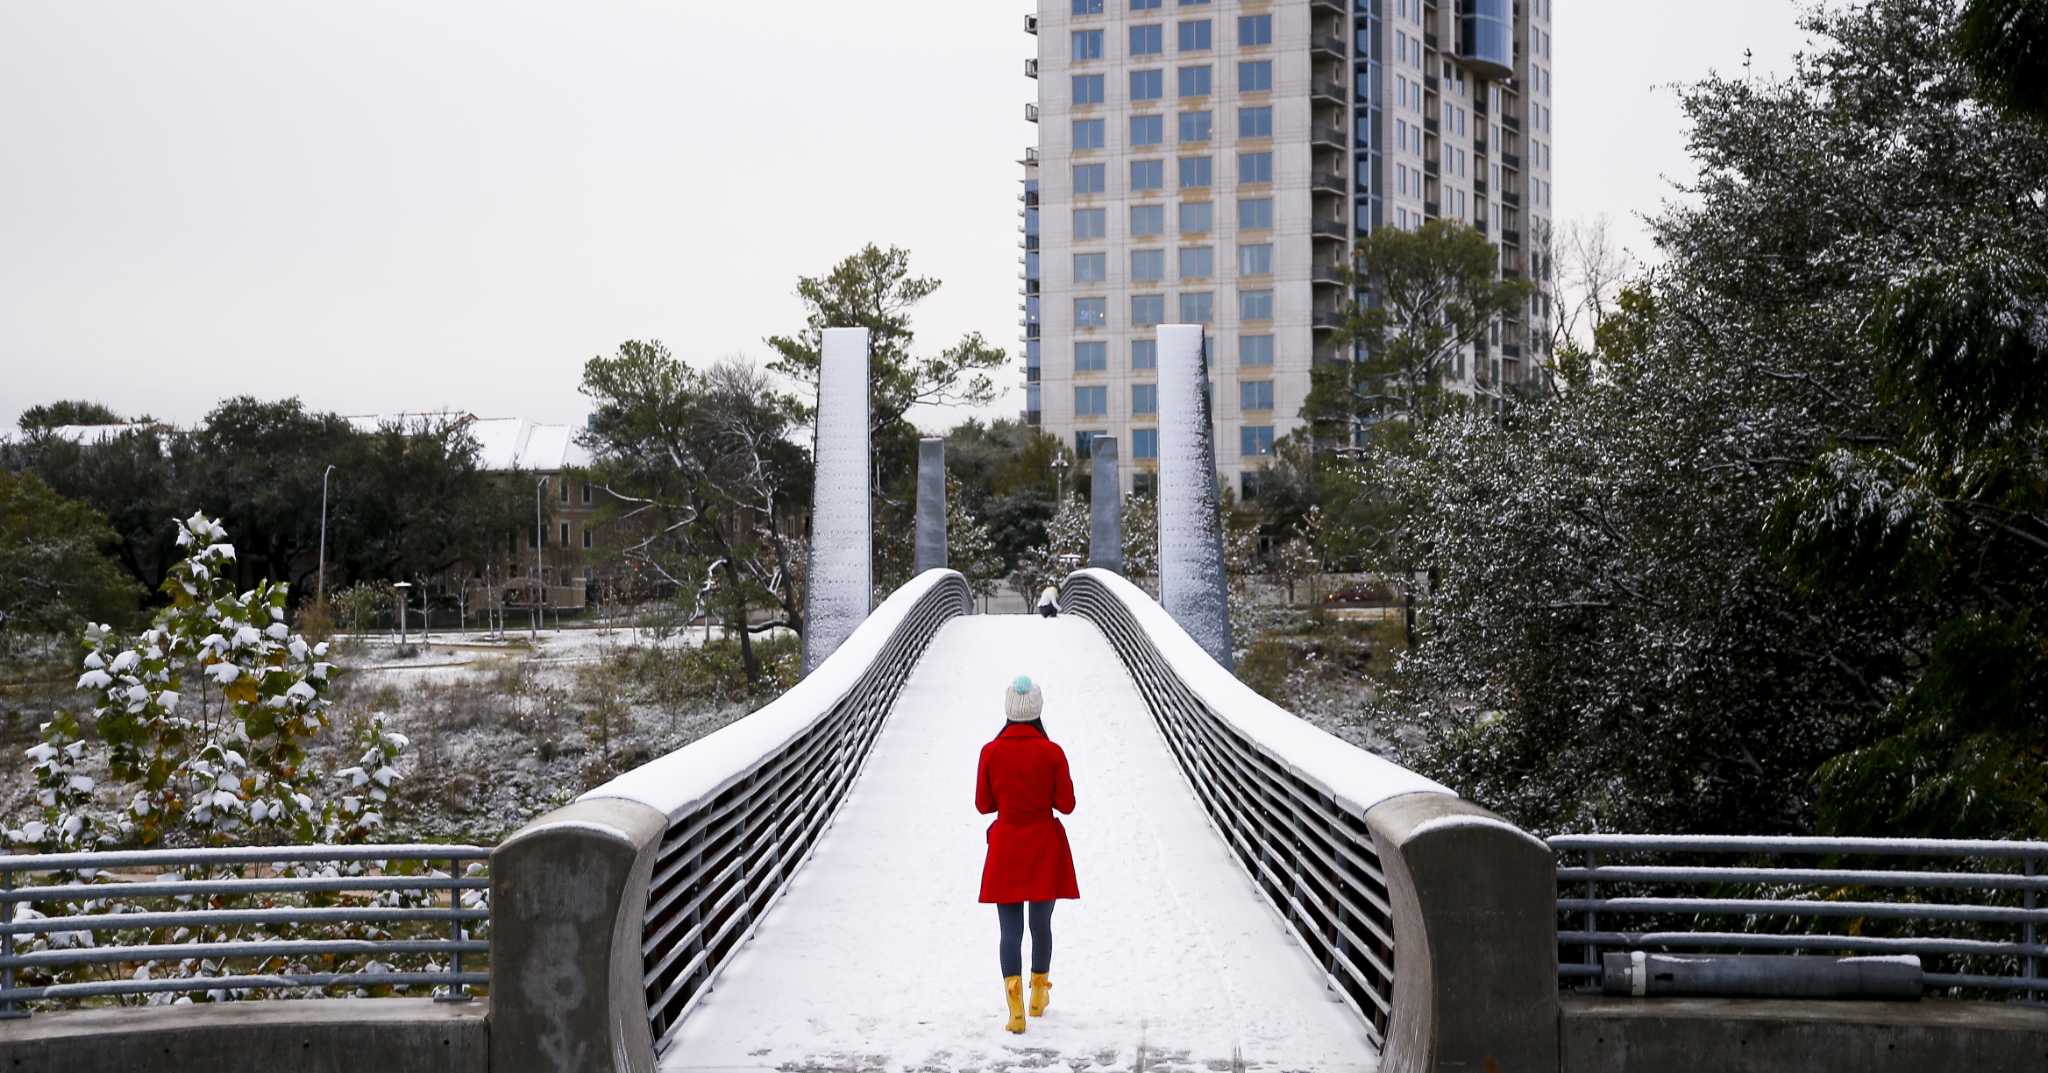 Will Houston see snow this winter? It's hard to say.